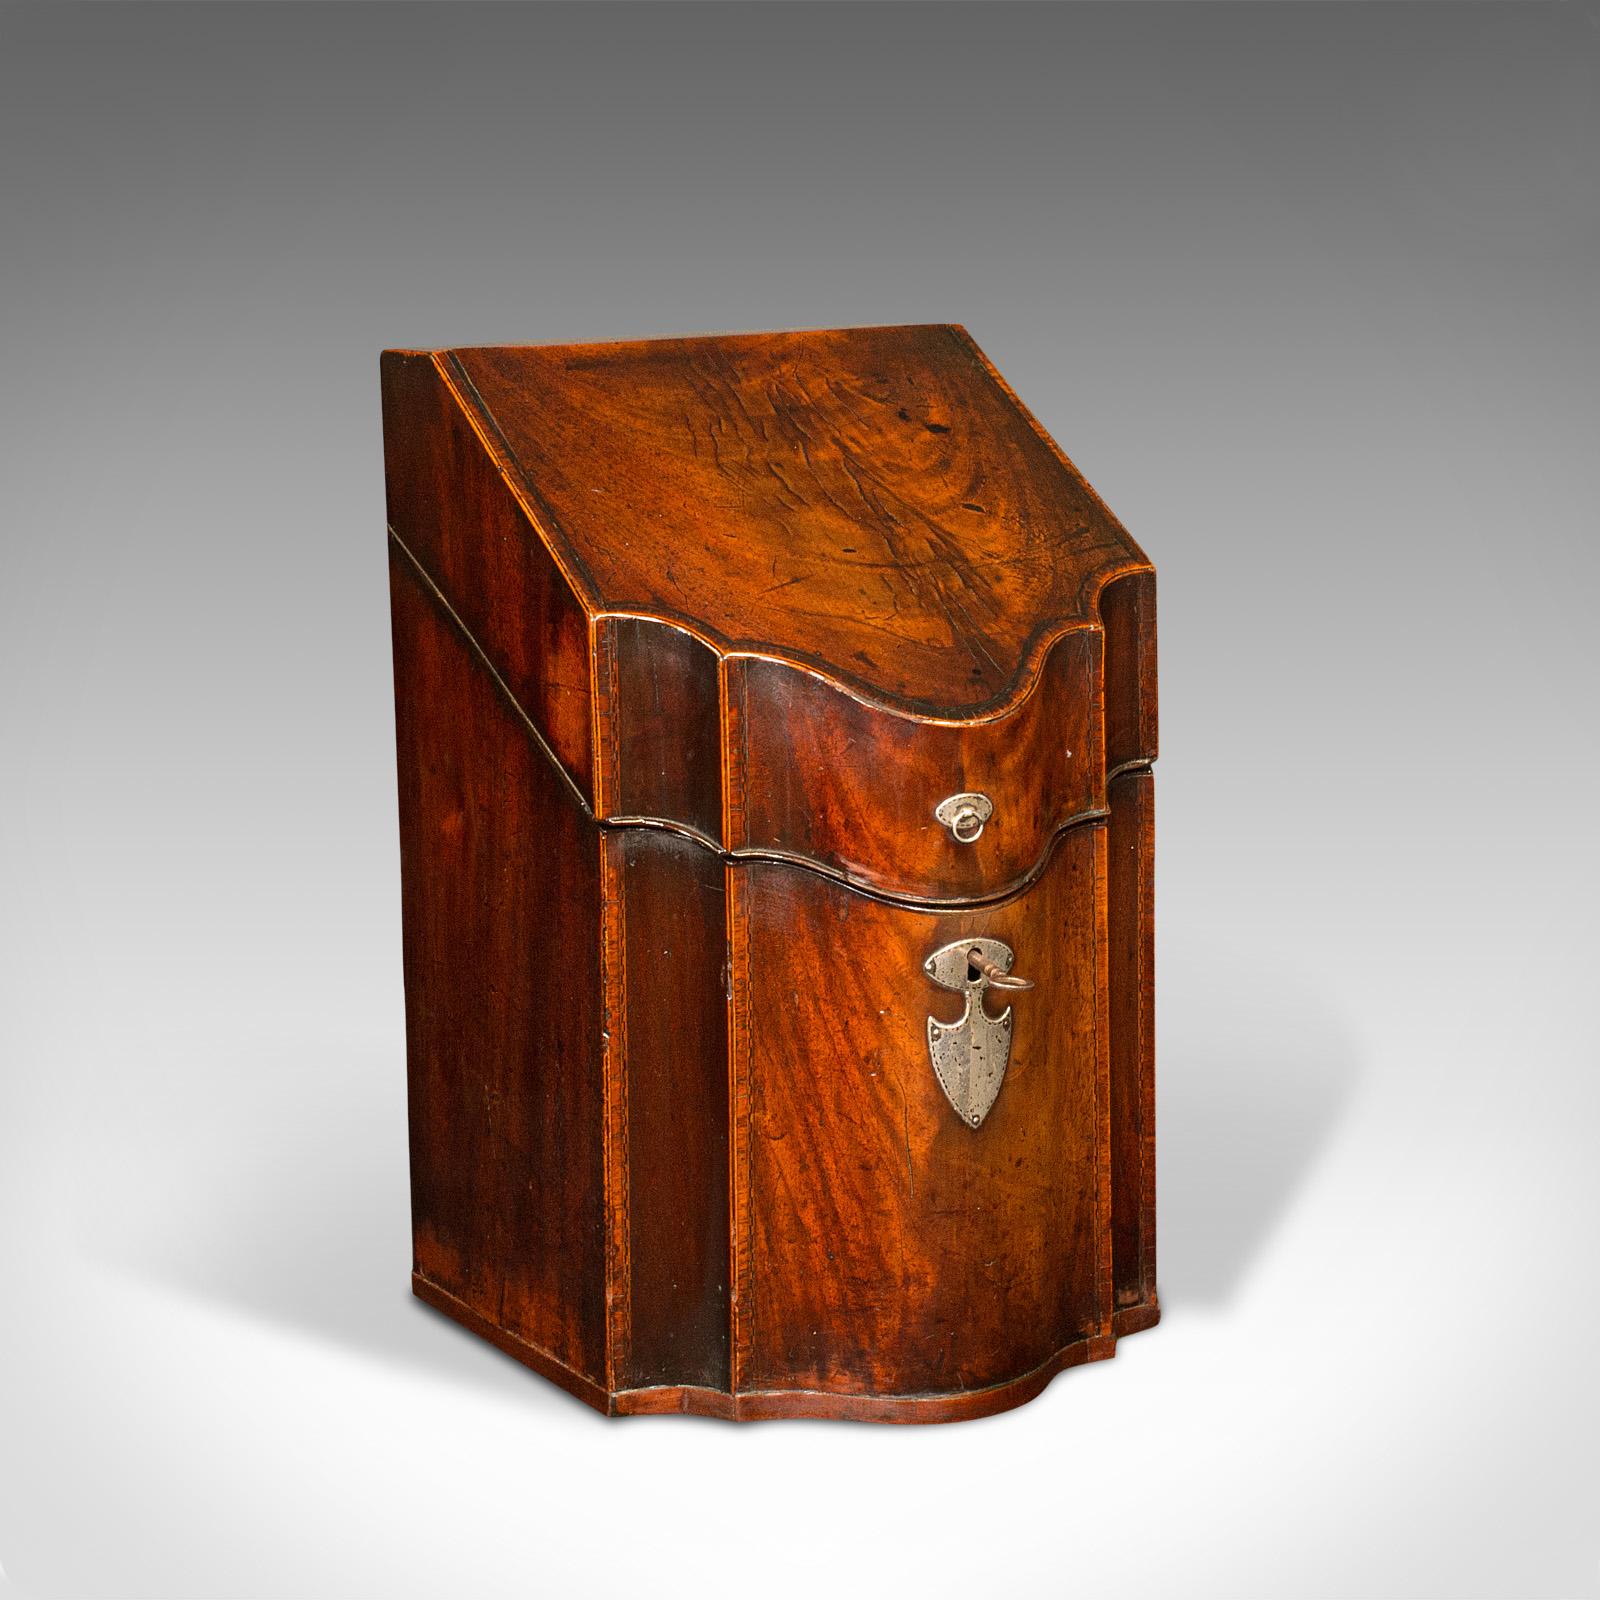 This is an antique knife box. An English, walnut cutlery canteen with fitted interior, dating to the Georgian period, circa 1800.

Appealing an unusual, retaining its fitted interior
Displays a desirable aged patina with some weathering commensurate